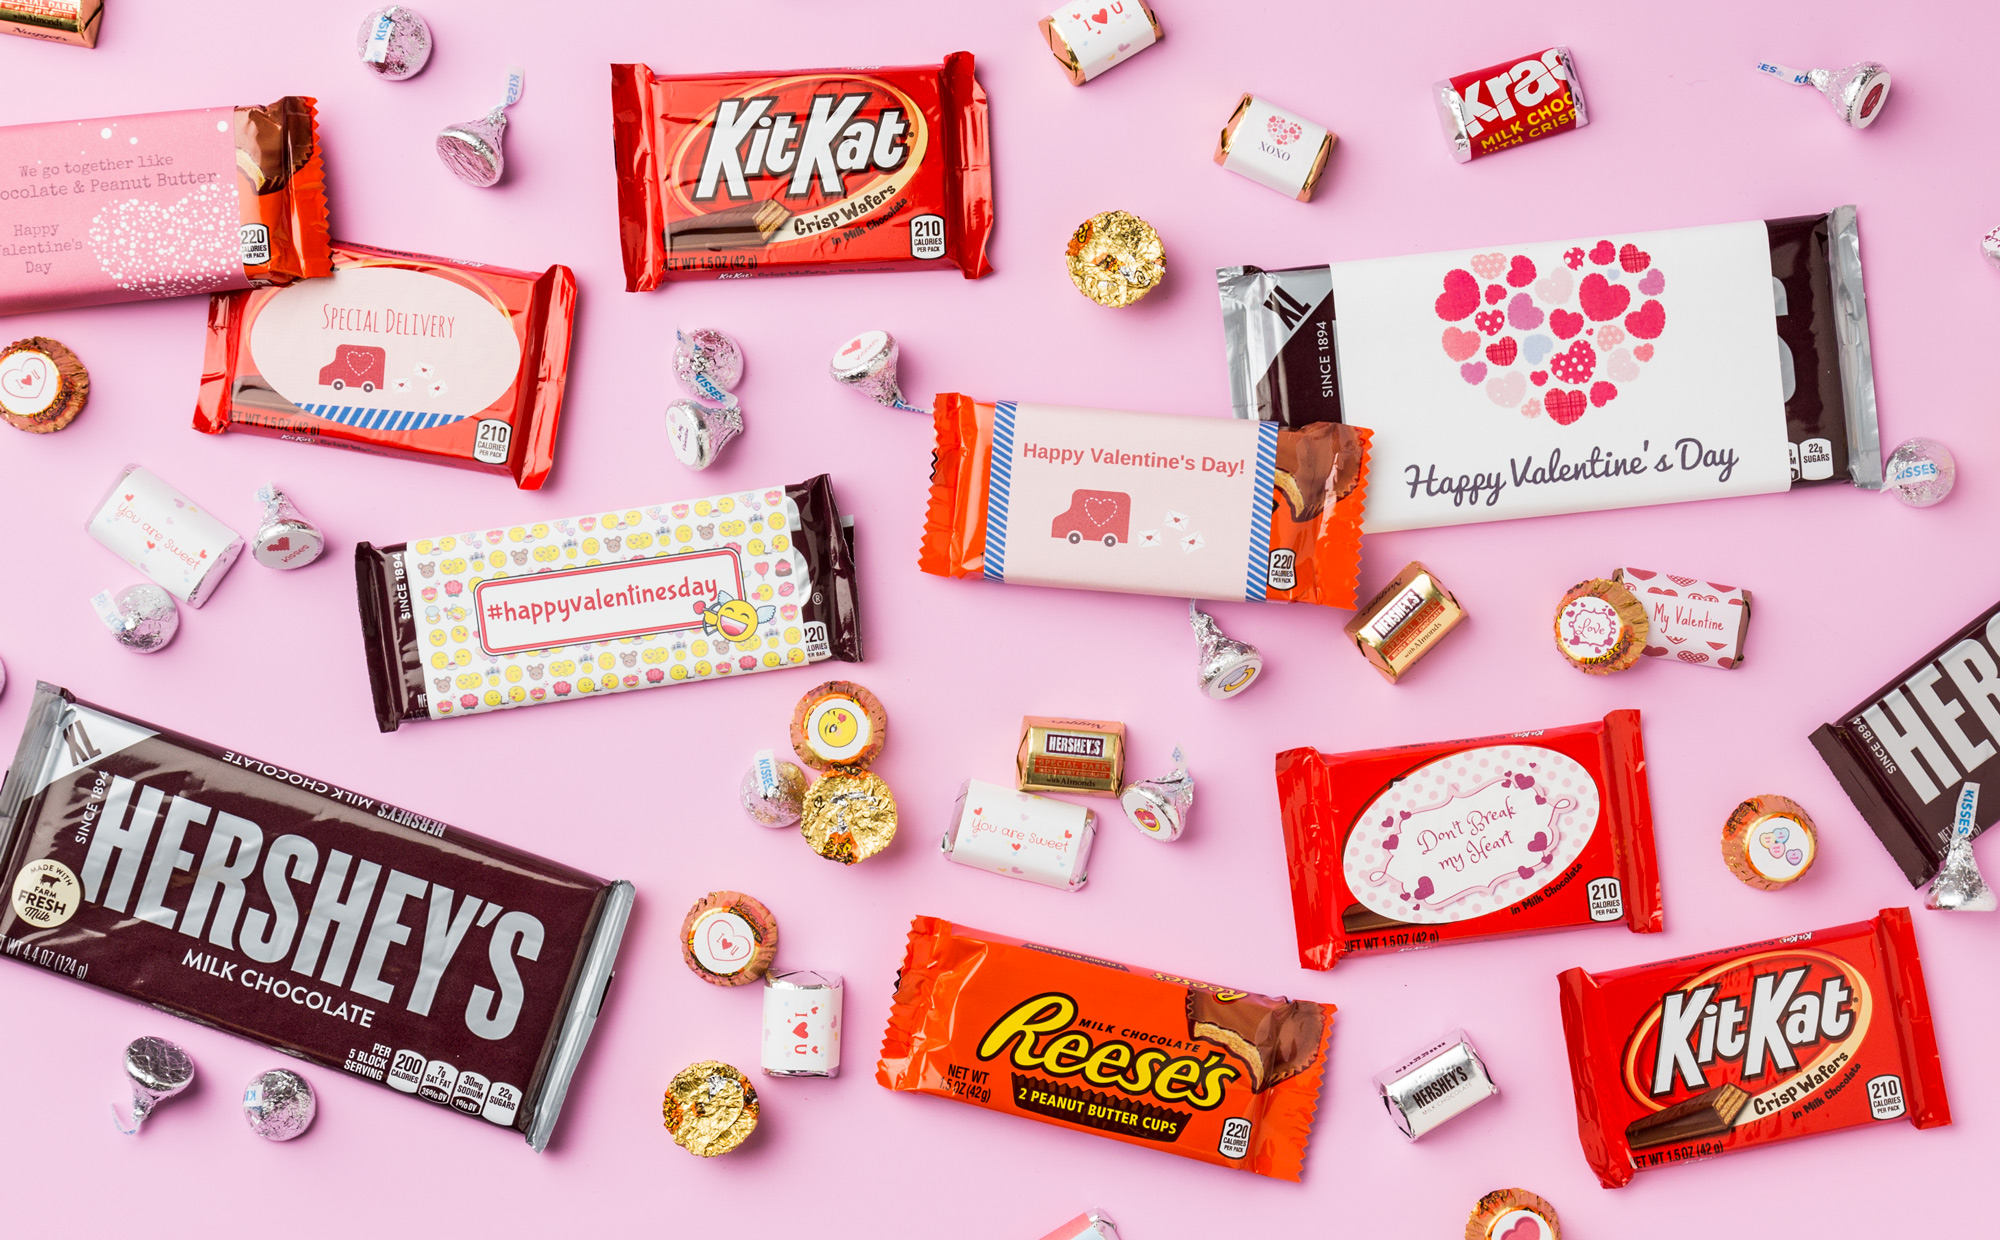 Add a special touch to Hershey products using Avery labels and free templates and designs for one-of-a-kind Valentine’s Day treats.